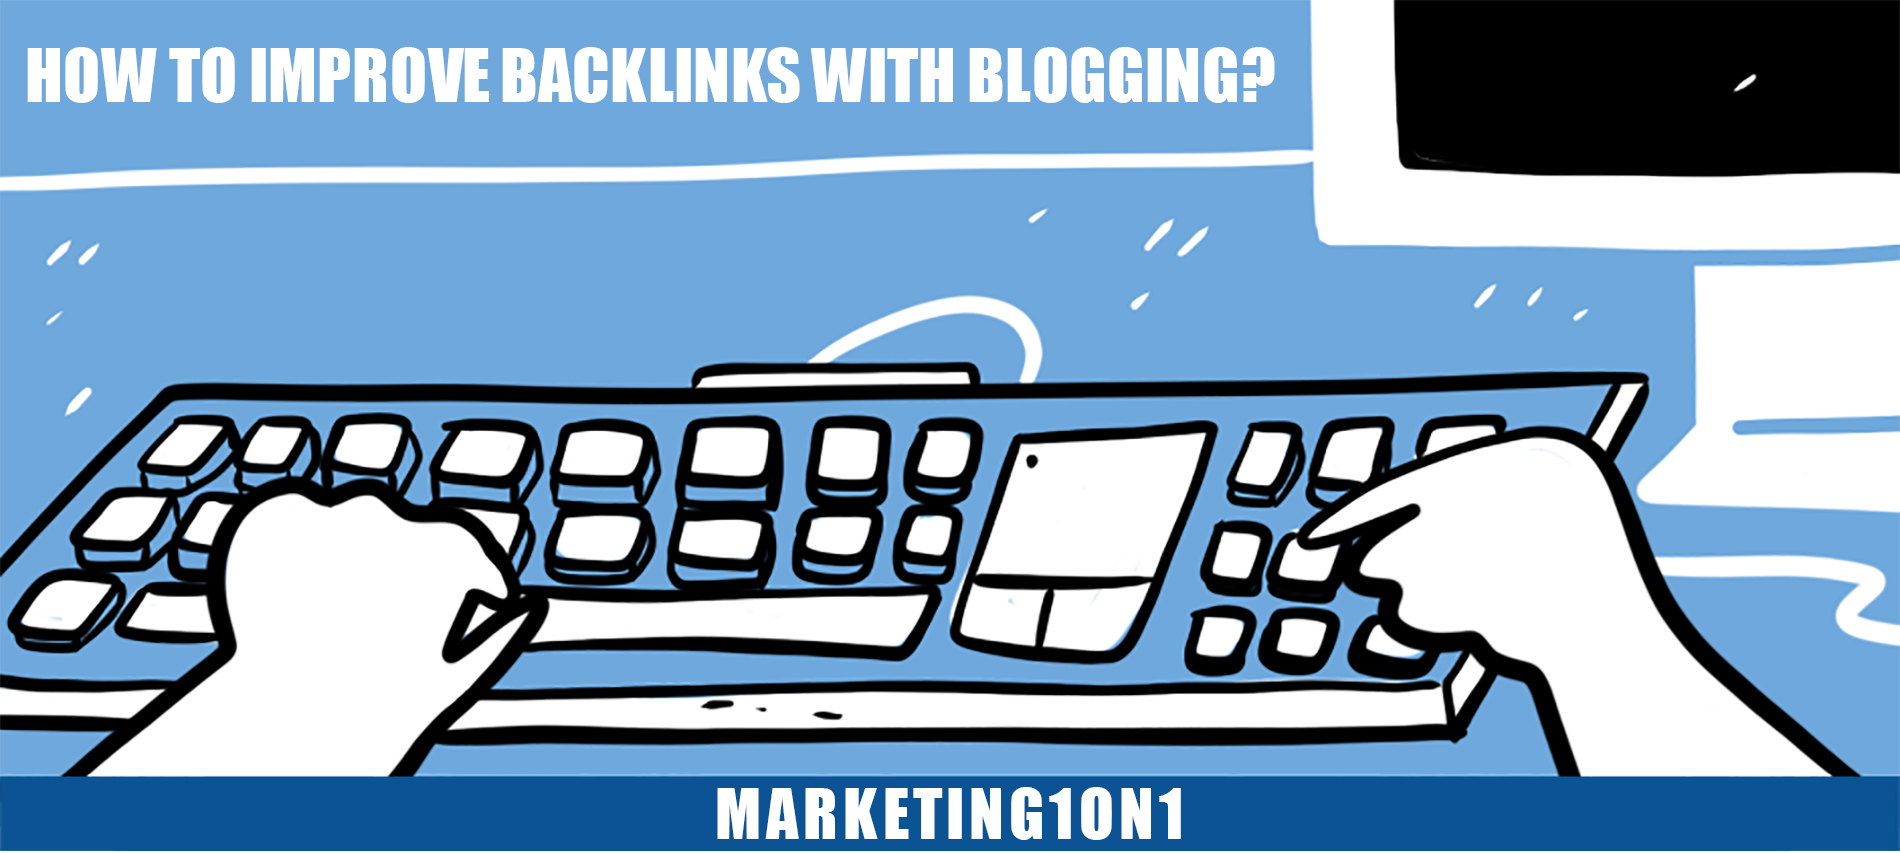 How to improve backlinks with blogging?